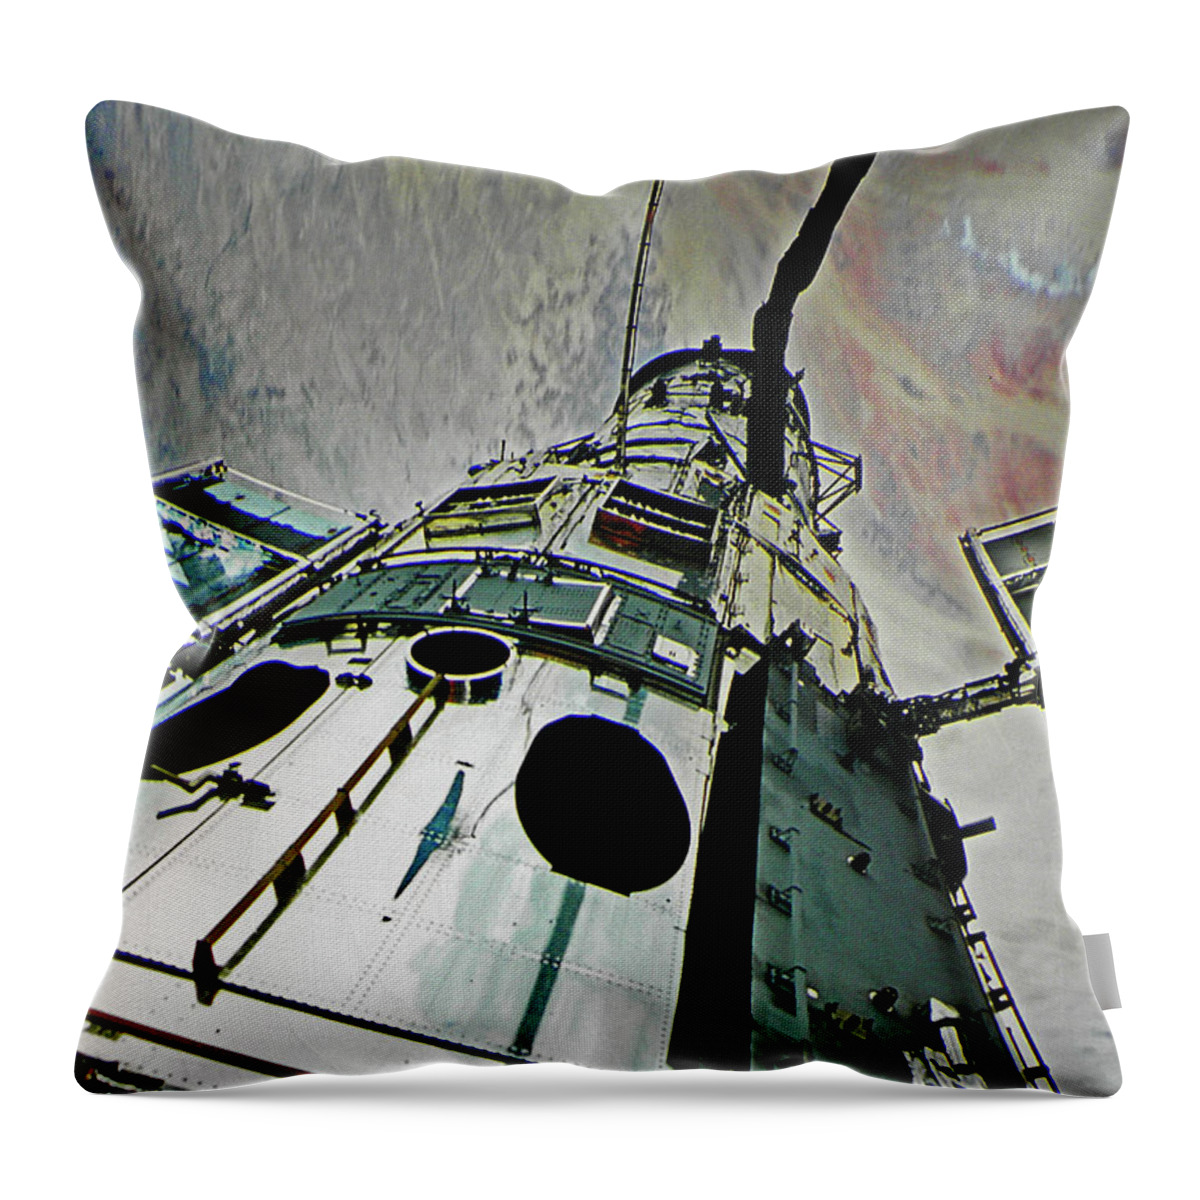 Outer Space Throw Pillow featuring the photograph New Frontiers by Elizabeth Hoskinson